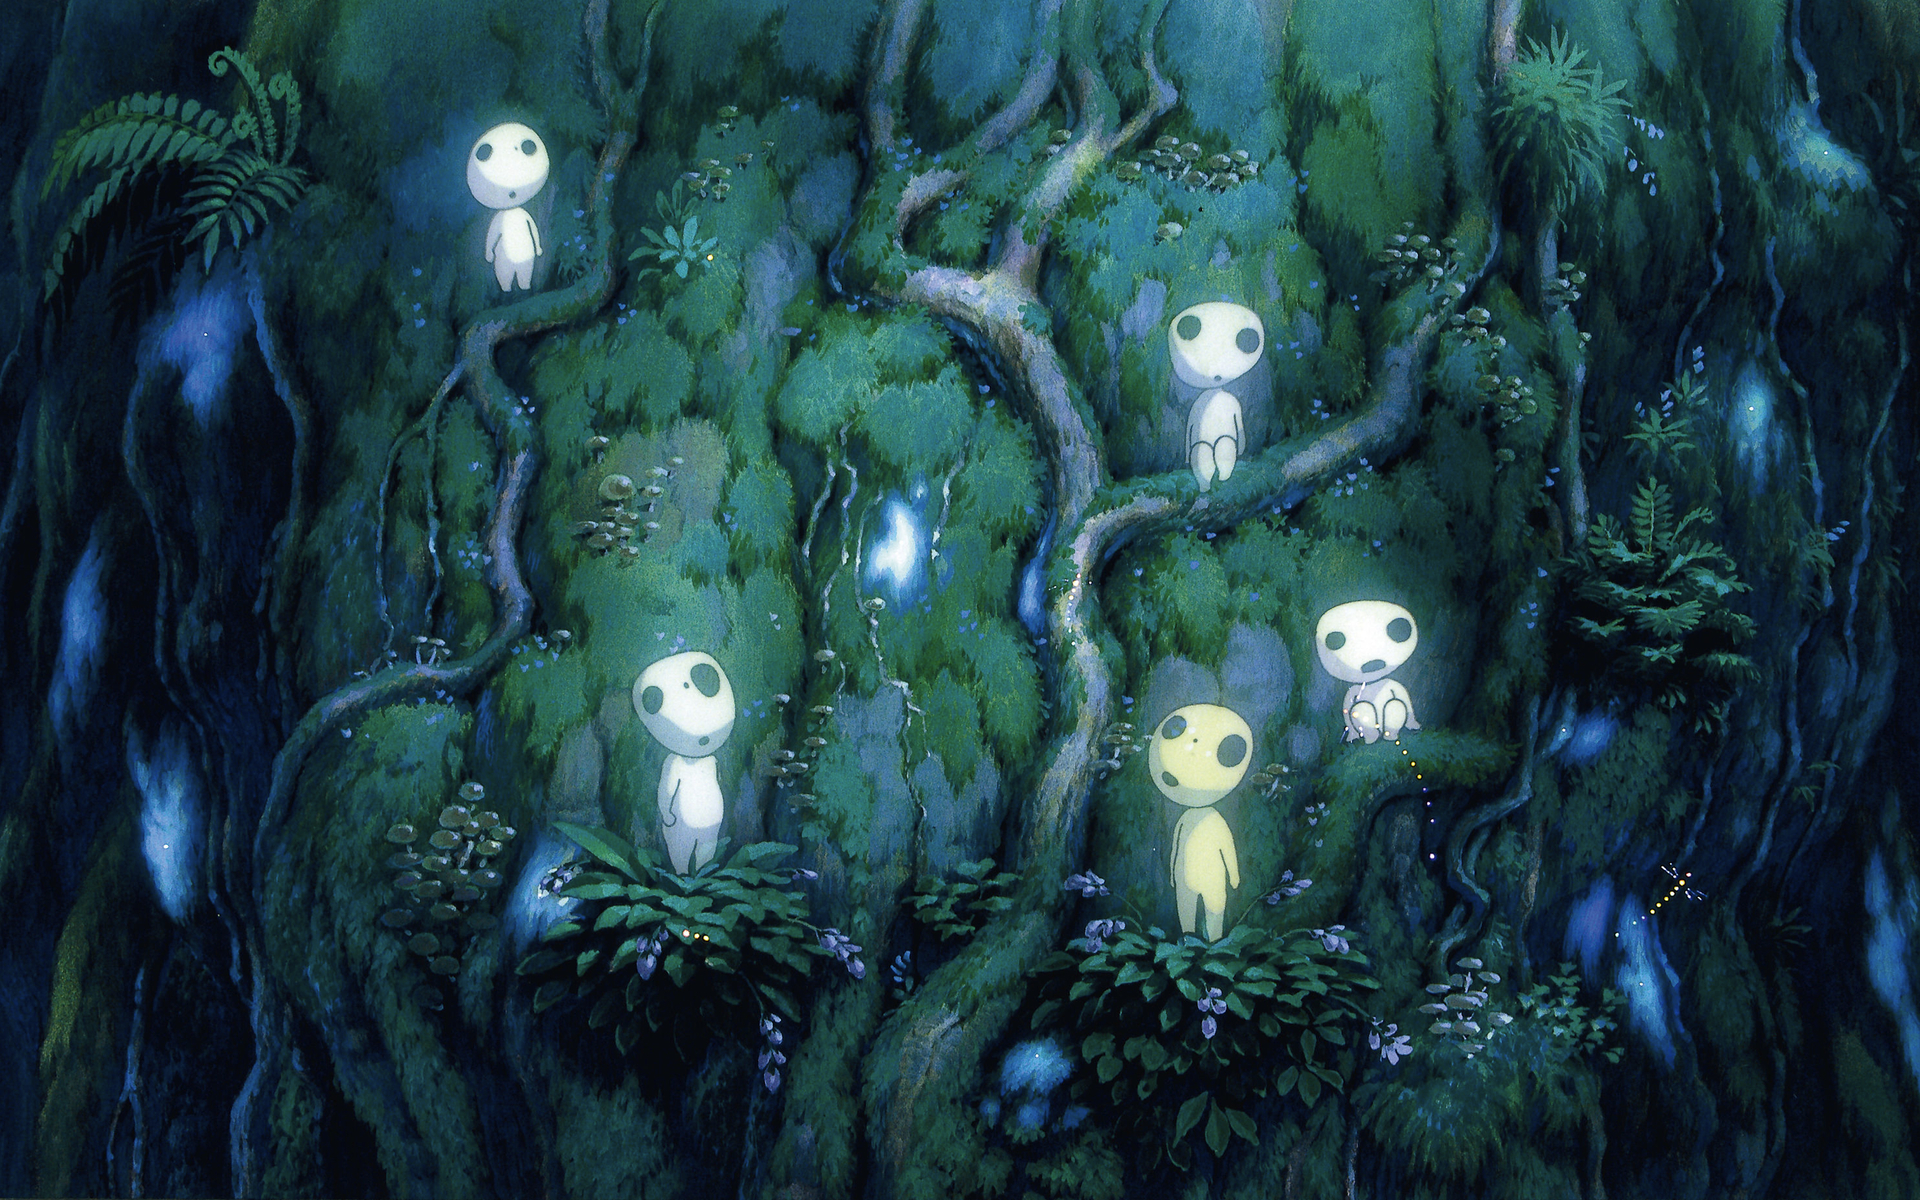 Small forest spirits known as kodama in traditional Japanese mythology sit amongst the vines of a tree.